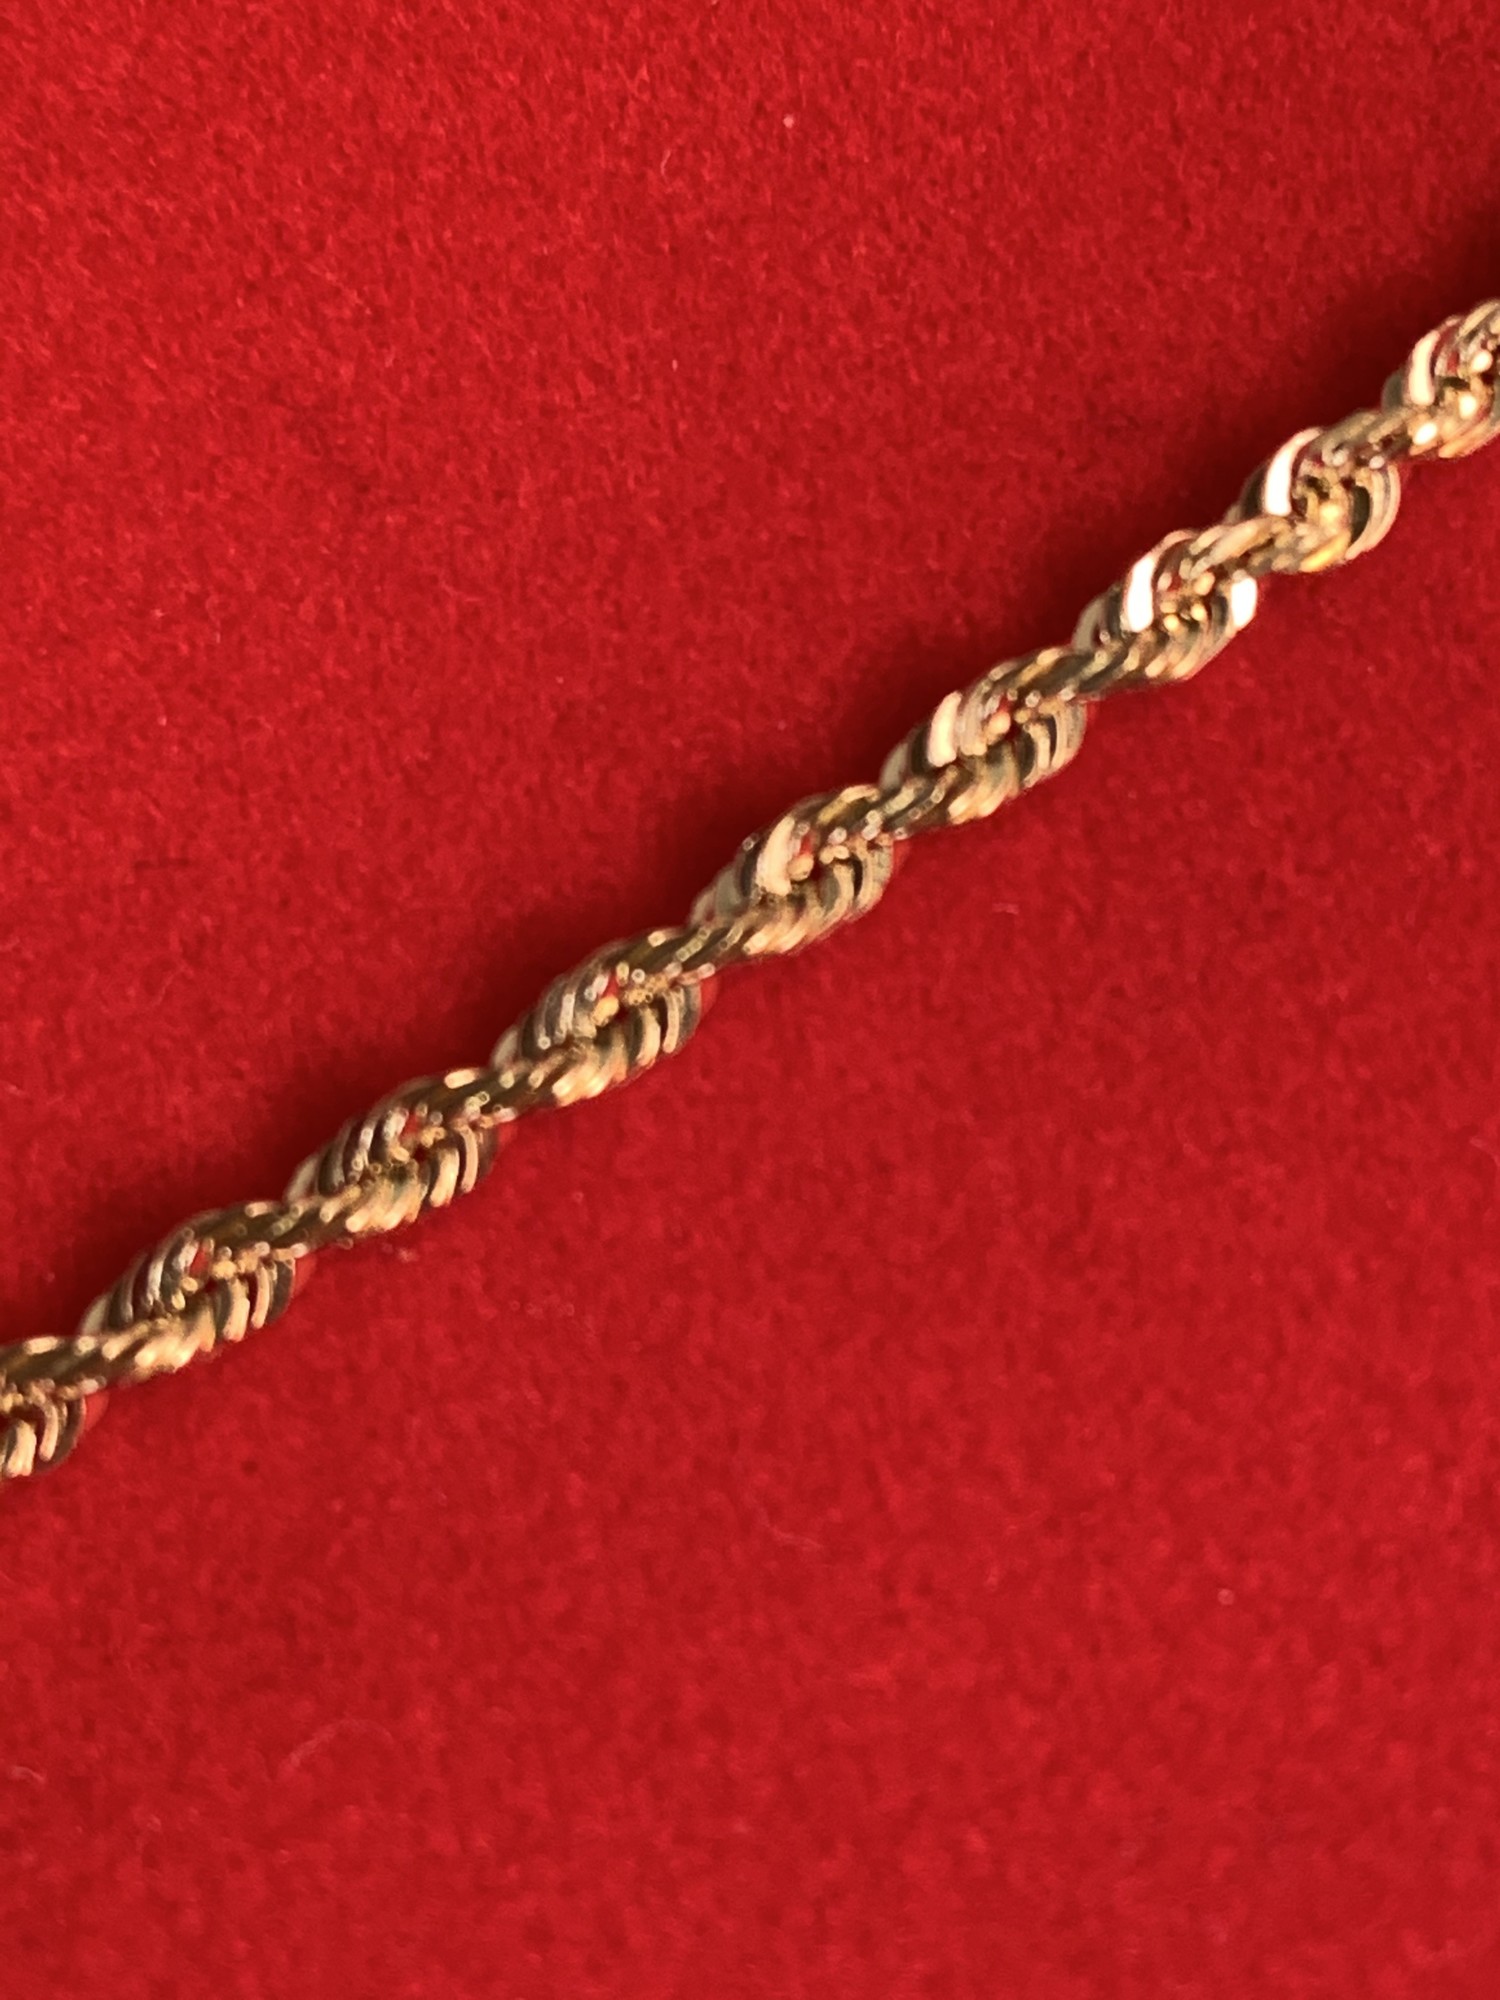 25\" Solid Rope Necklace
2mm.  Lobster Clasp.
Like New Condition
14 Karat Yellow Gold
$1190.